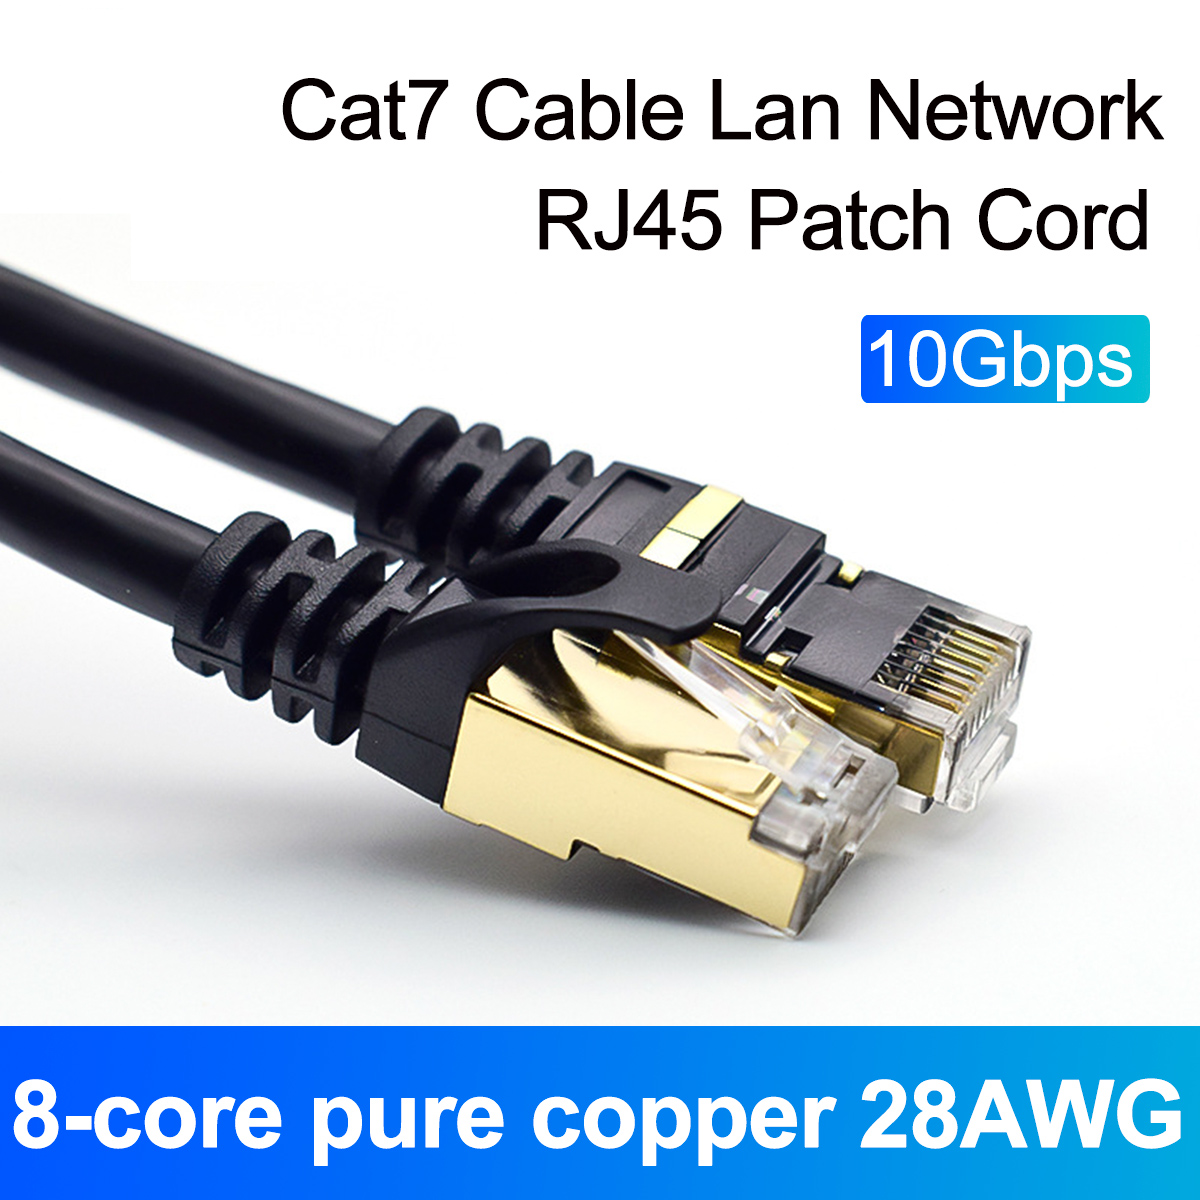 Black-Cat7-28AWG-High-Speed-Pure-Copper-Core-Networking-Cable-Cat7-Cable-LAN-Network-RJ45-Patch-Cord-1621196-3